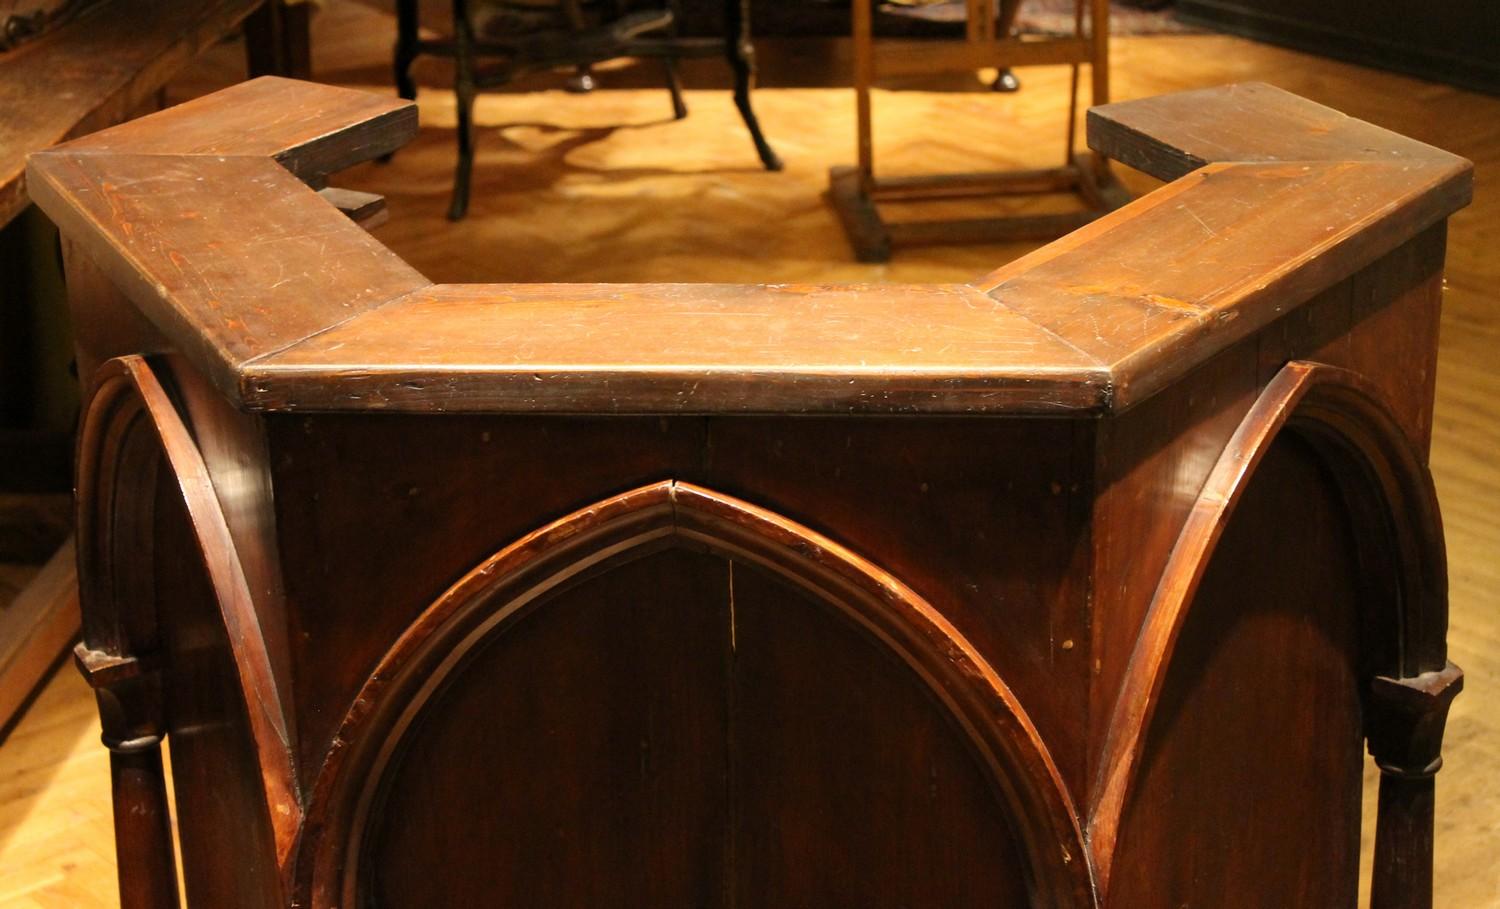 Italian Gothic Revival Carved Walnut Wood Pulpit or Bar Counter Arches and Columns Shape